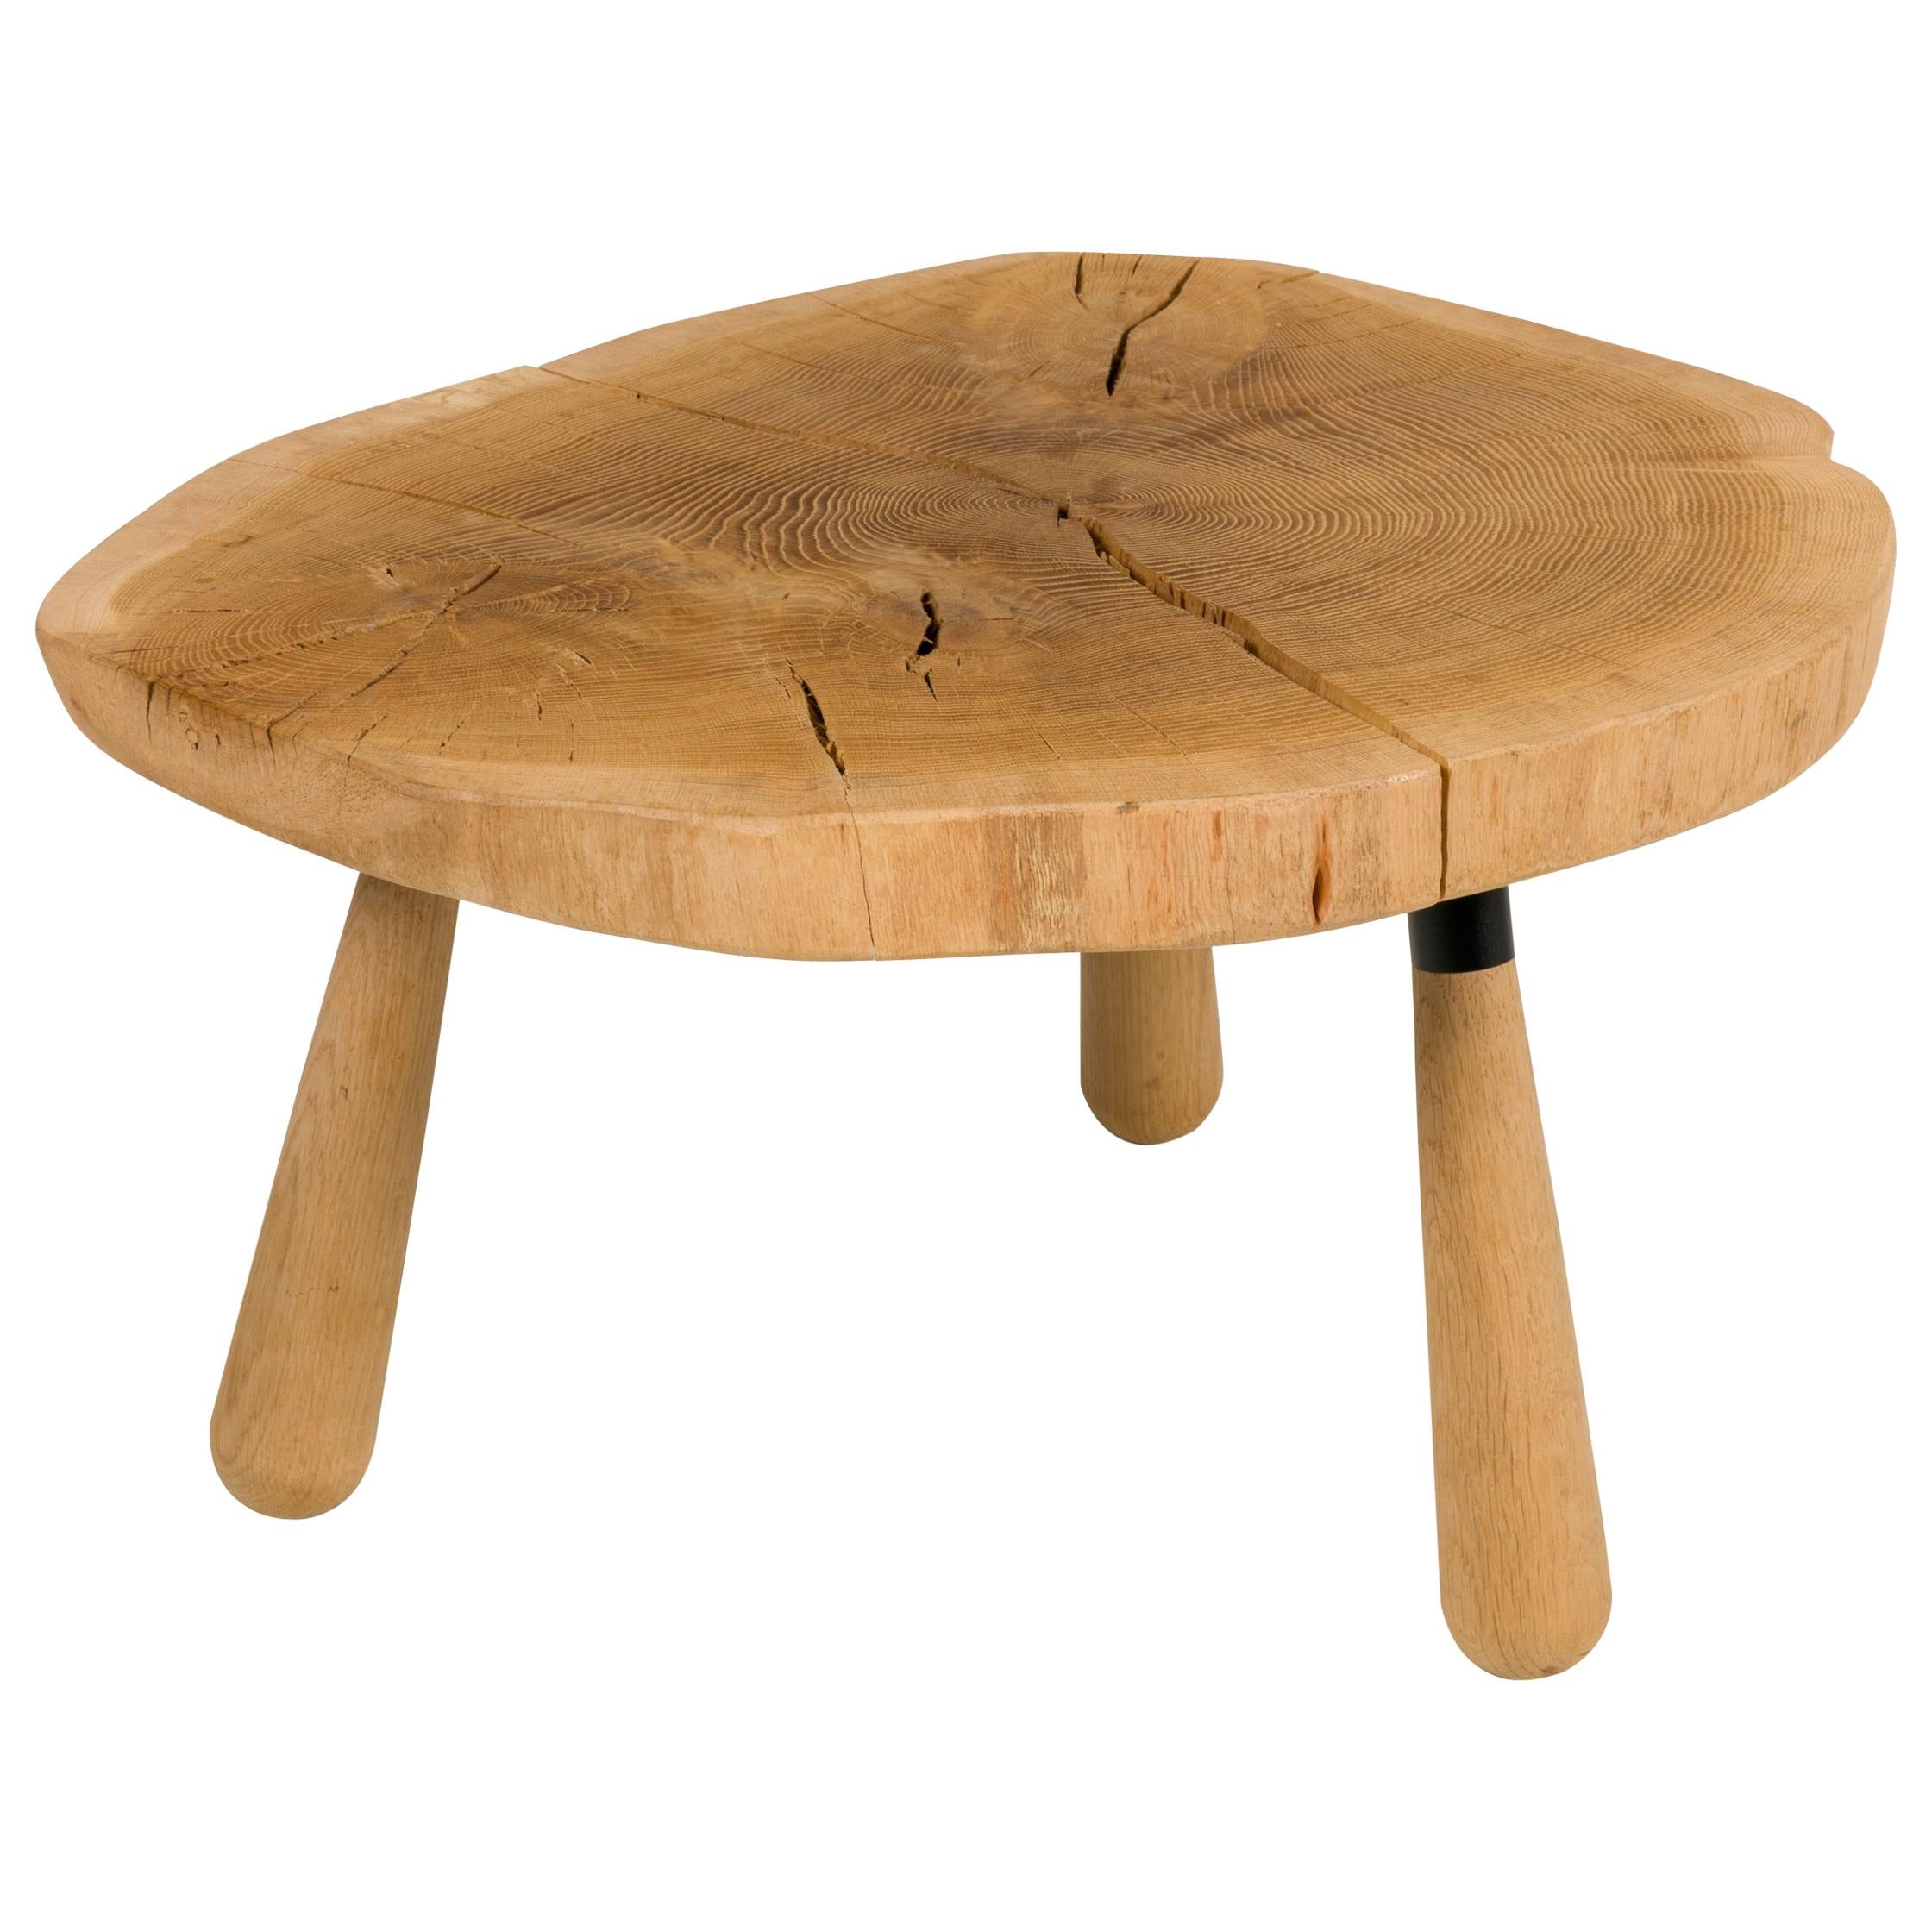 Solid Oak "Troll" Occasional Table by Lop Furniture, Denmark 2018